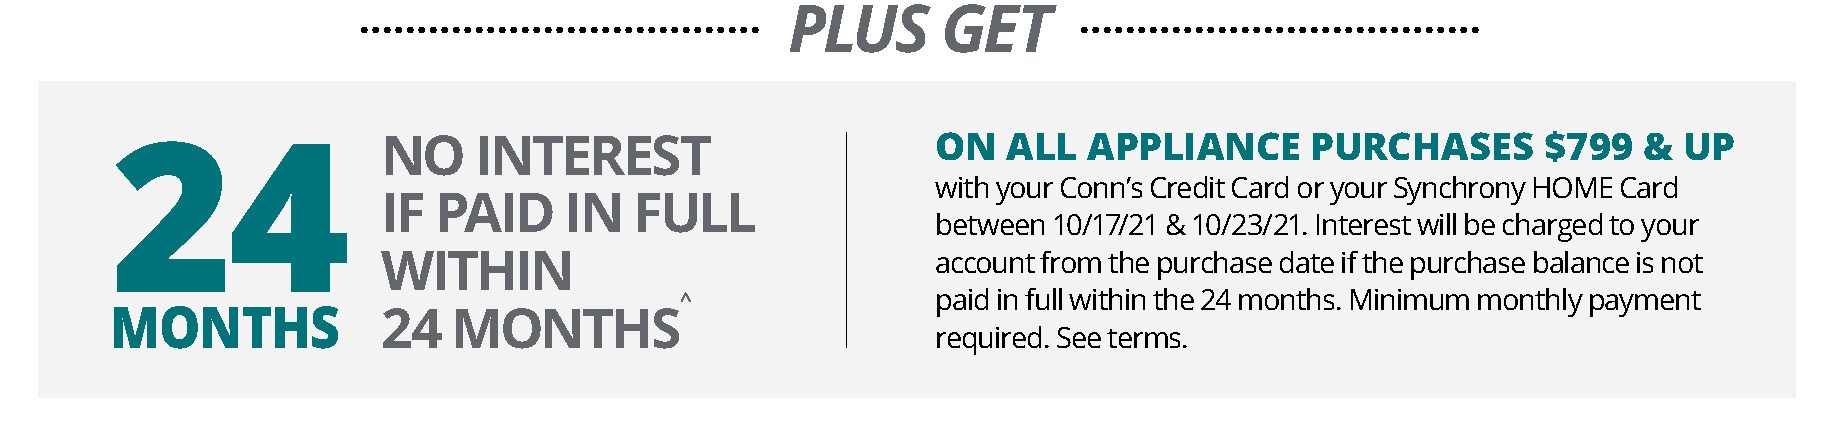 PLUS GET | 24 months NO INTEREST IF PAID IN FULL WITHIN 24 MONTHS^ | ON ALL APPLIANCE PURCHASES $799 & UP with your Conn’s Credit Card or your Synchrony HOME Card between 10/17/21 & 10/23/21. Interest will be charged to your account from the purchase date if the purchase balance is not paid in full within the 24 months. Minimum monthly payment required. See terms.